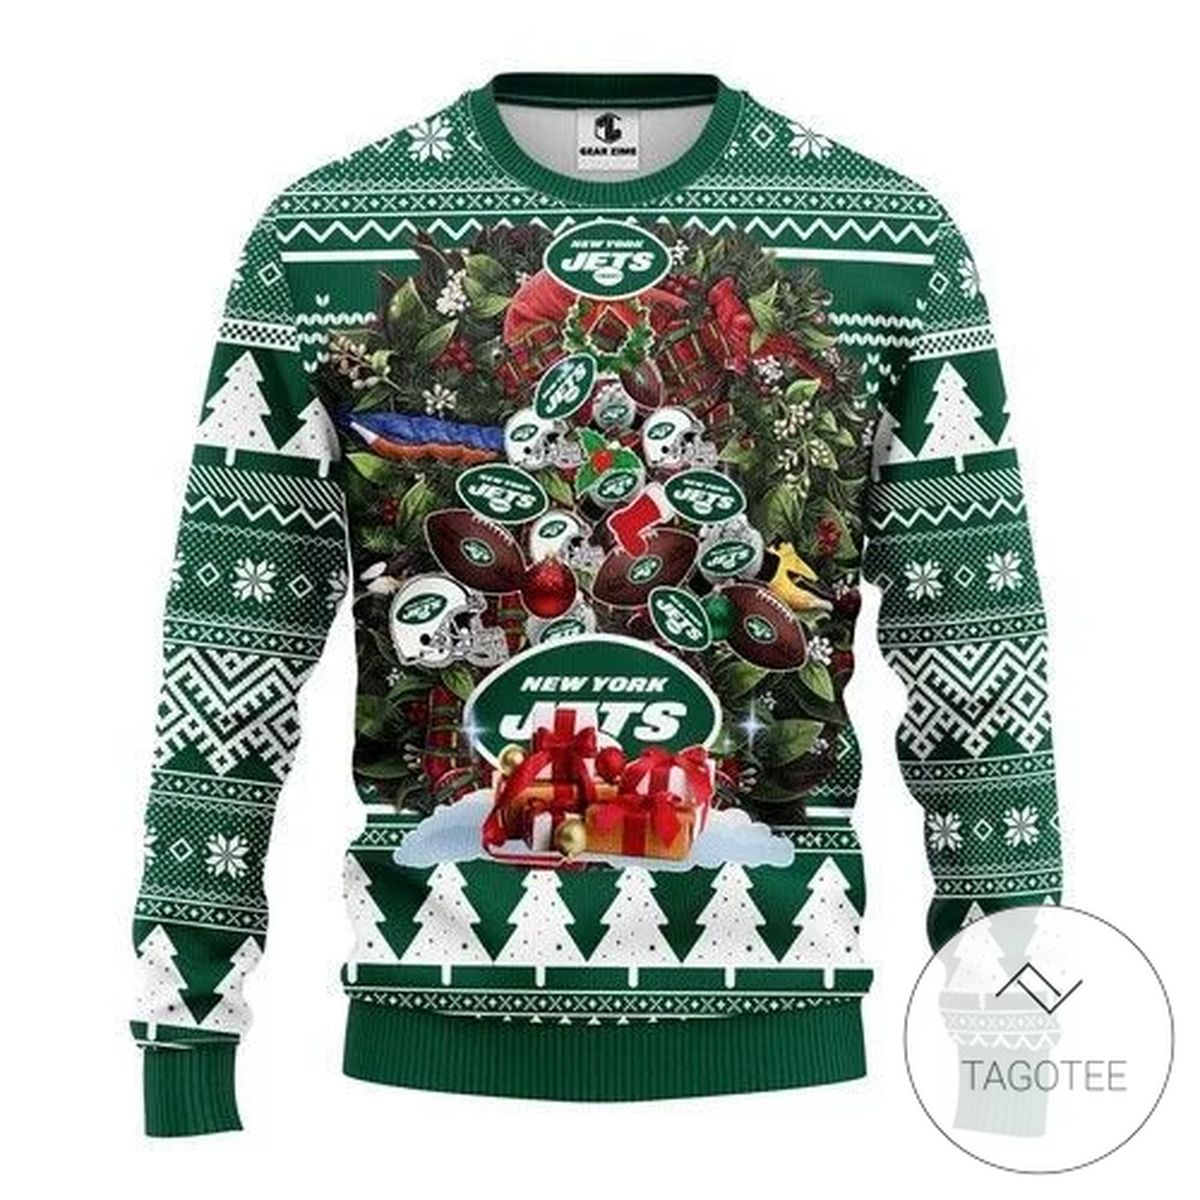 New York Jets Tree Sweatshirt Knitted Ugly Christmas Sweater